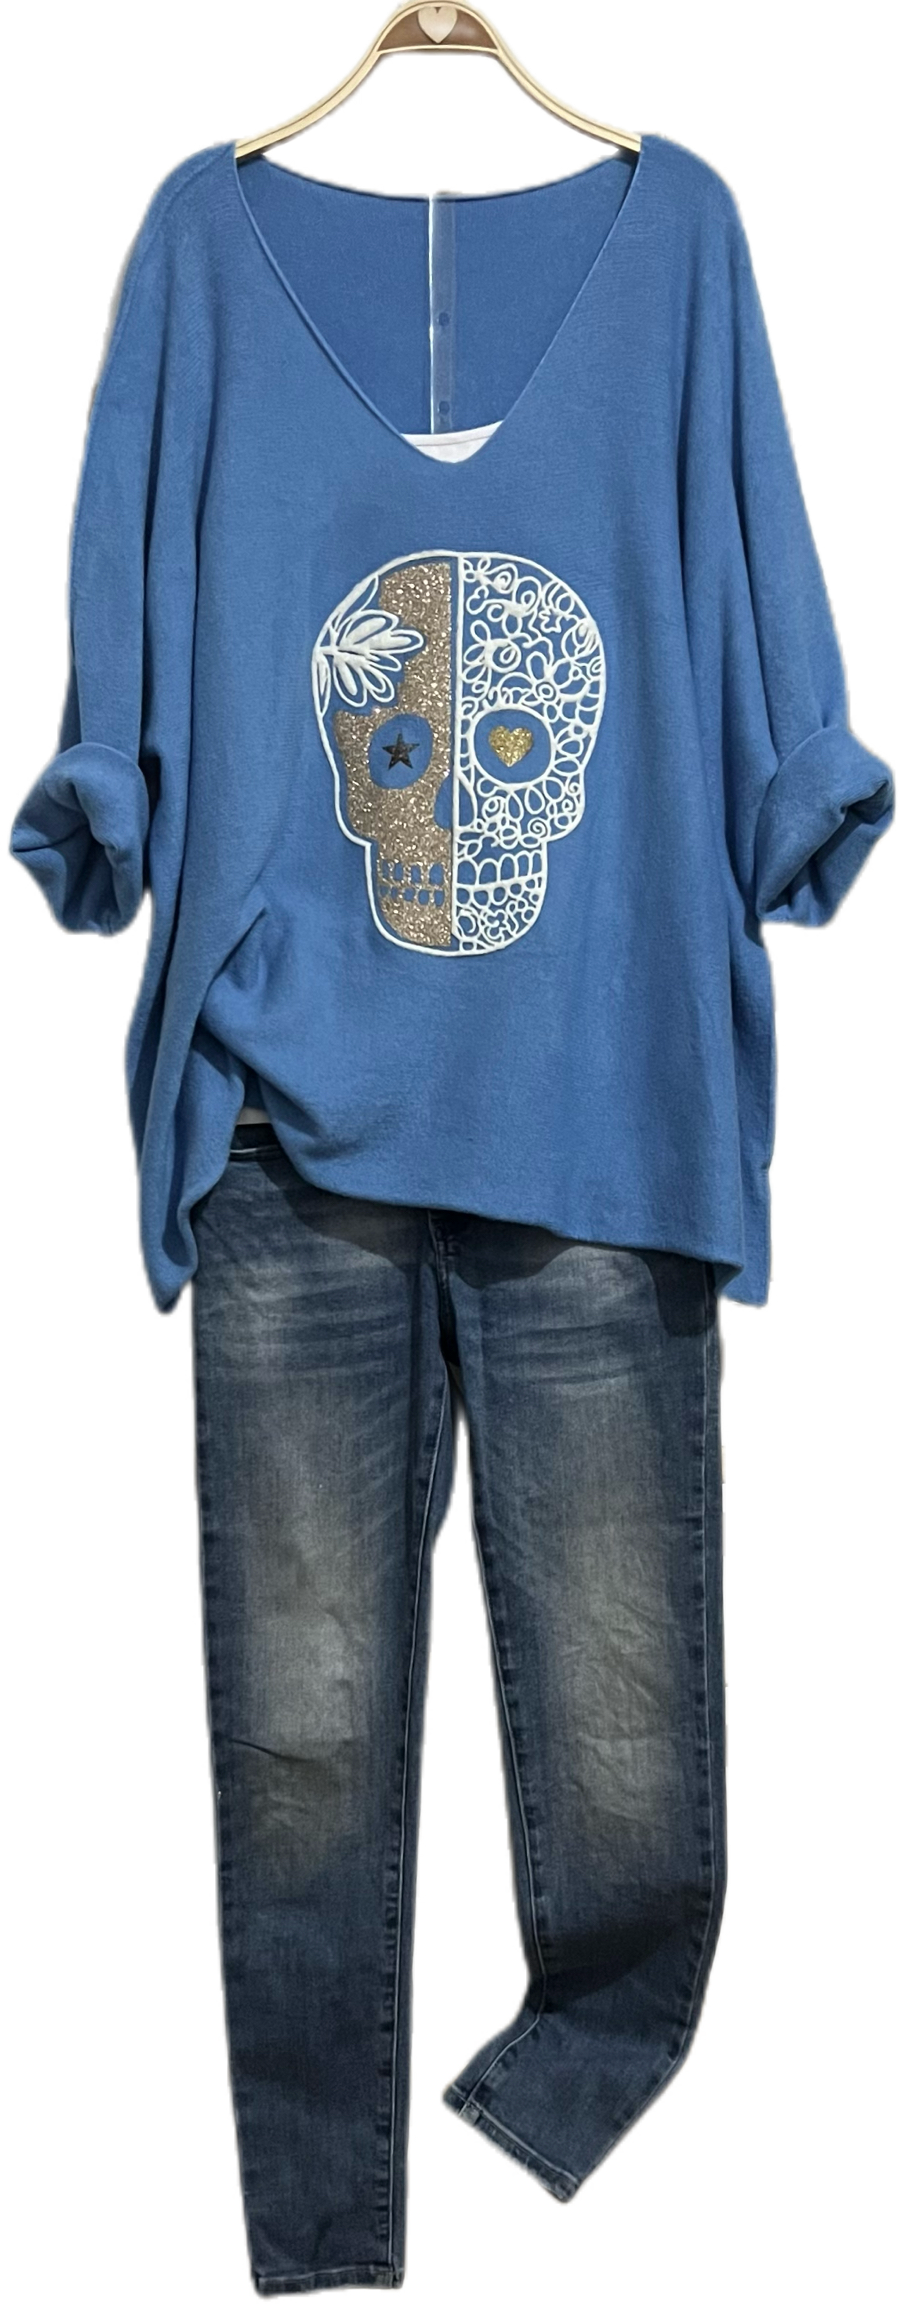 Jersey "Over Lace Skull" azul